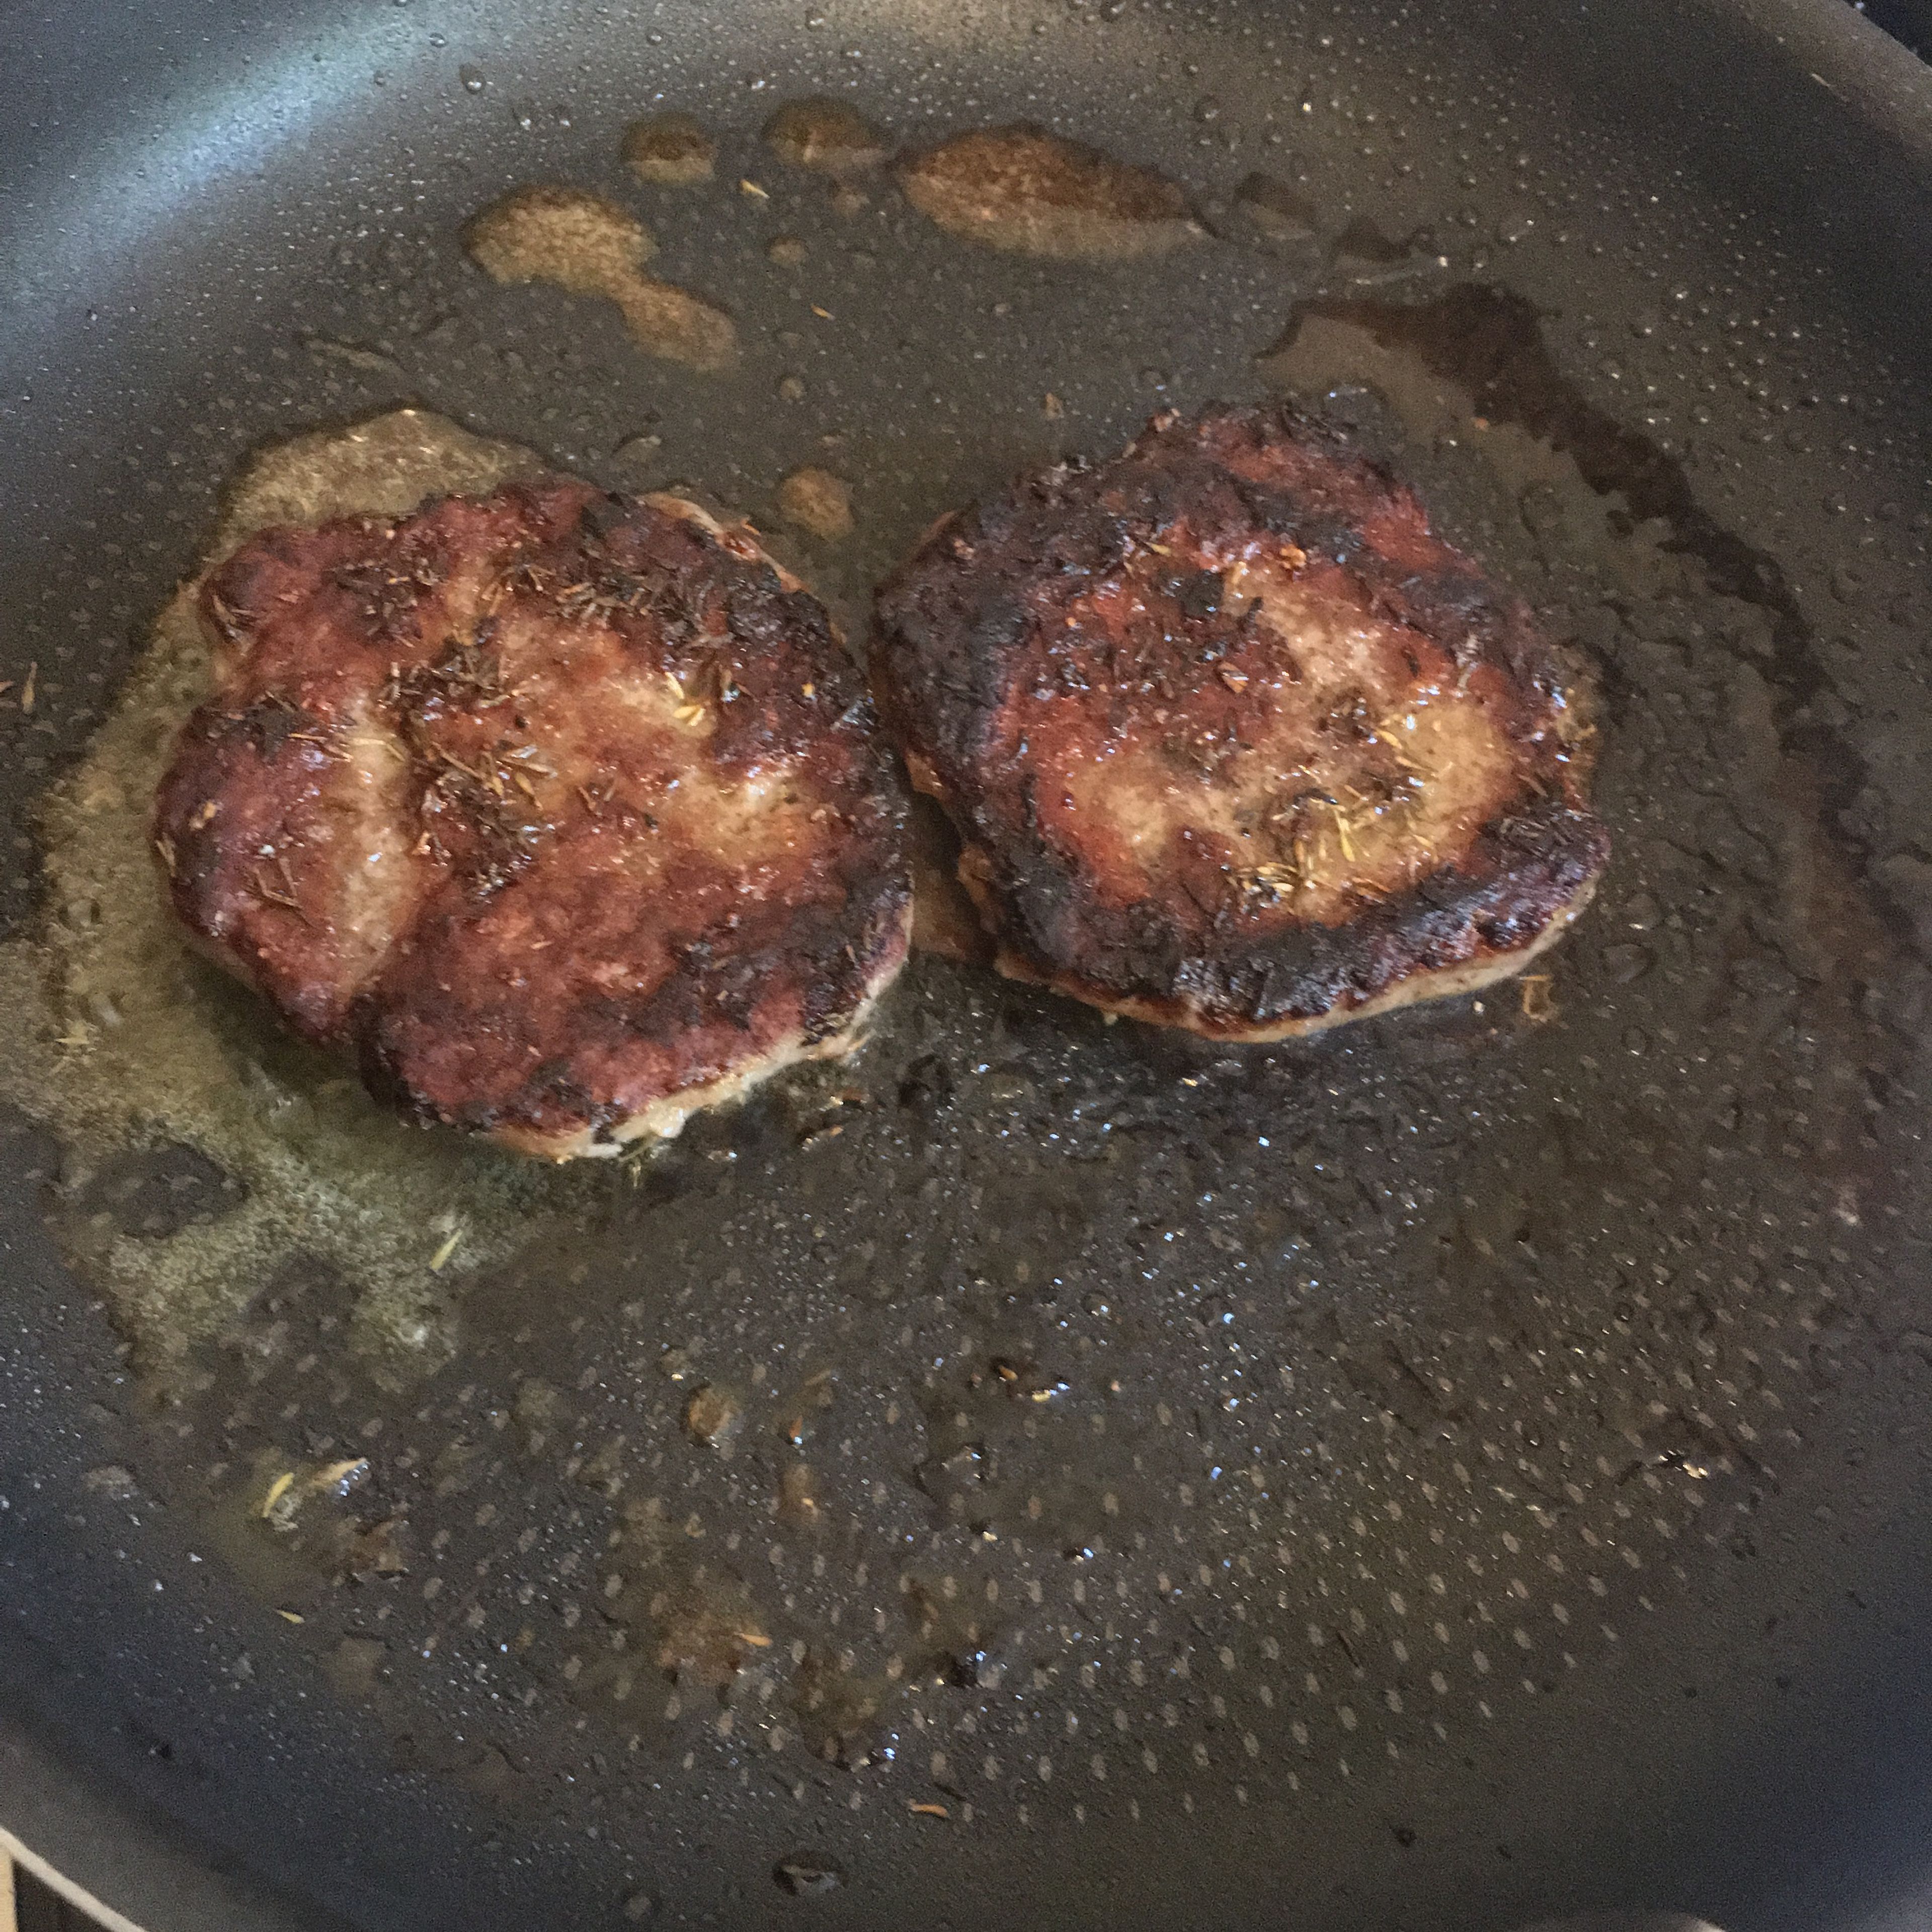 After the 5 minutes are up, turn the burgers over and again, cook this side for 5 minutes.